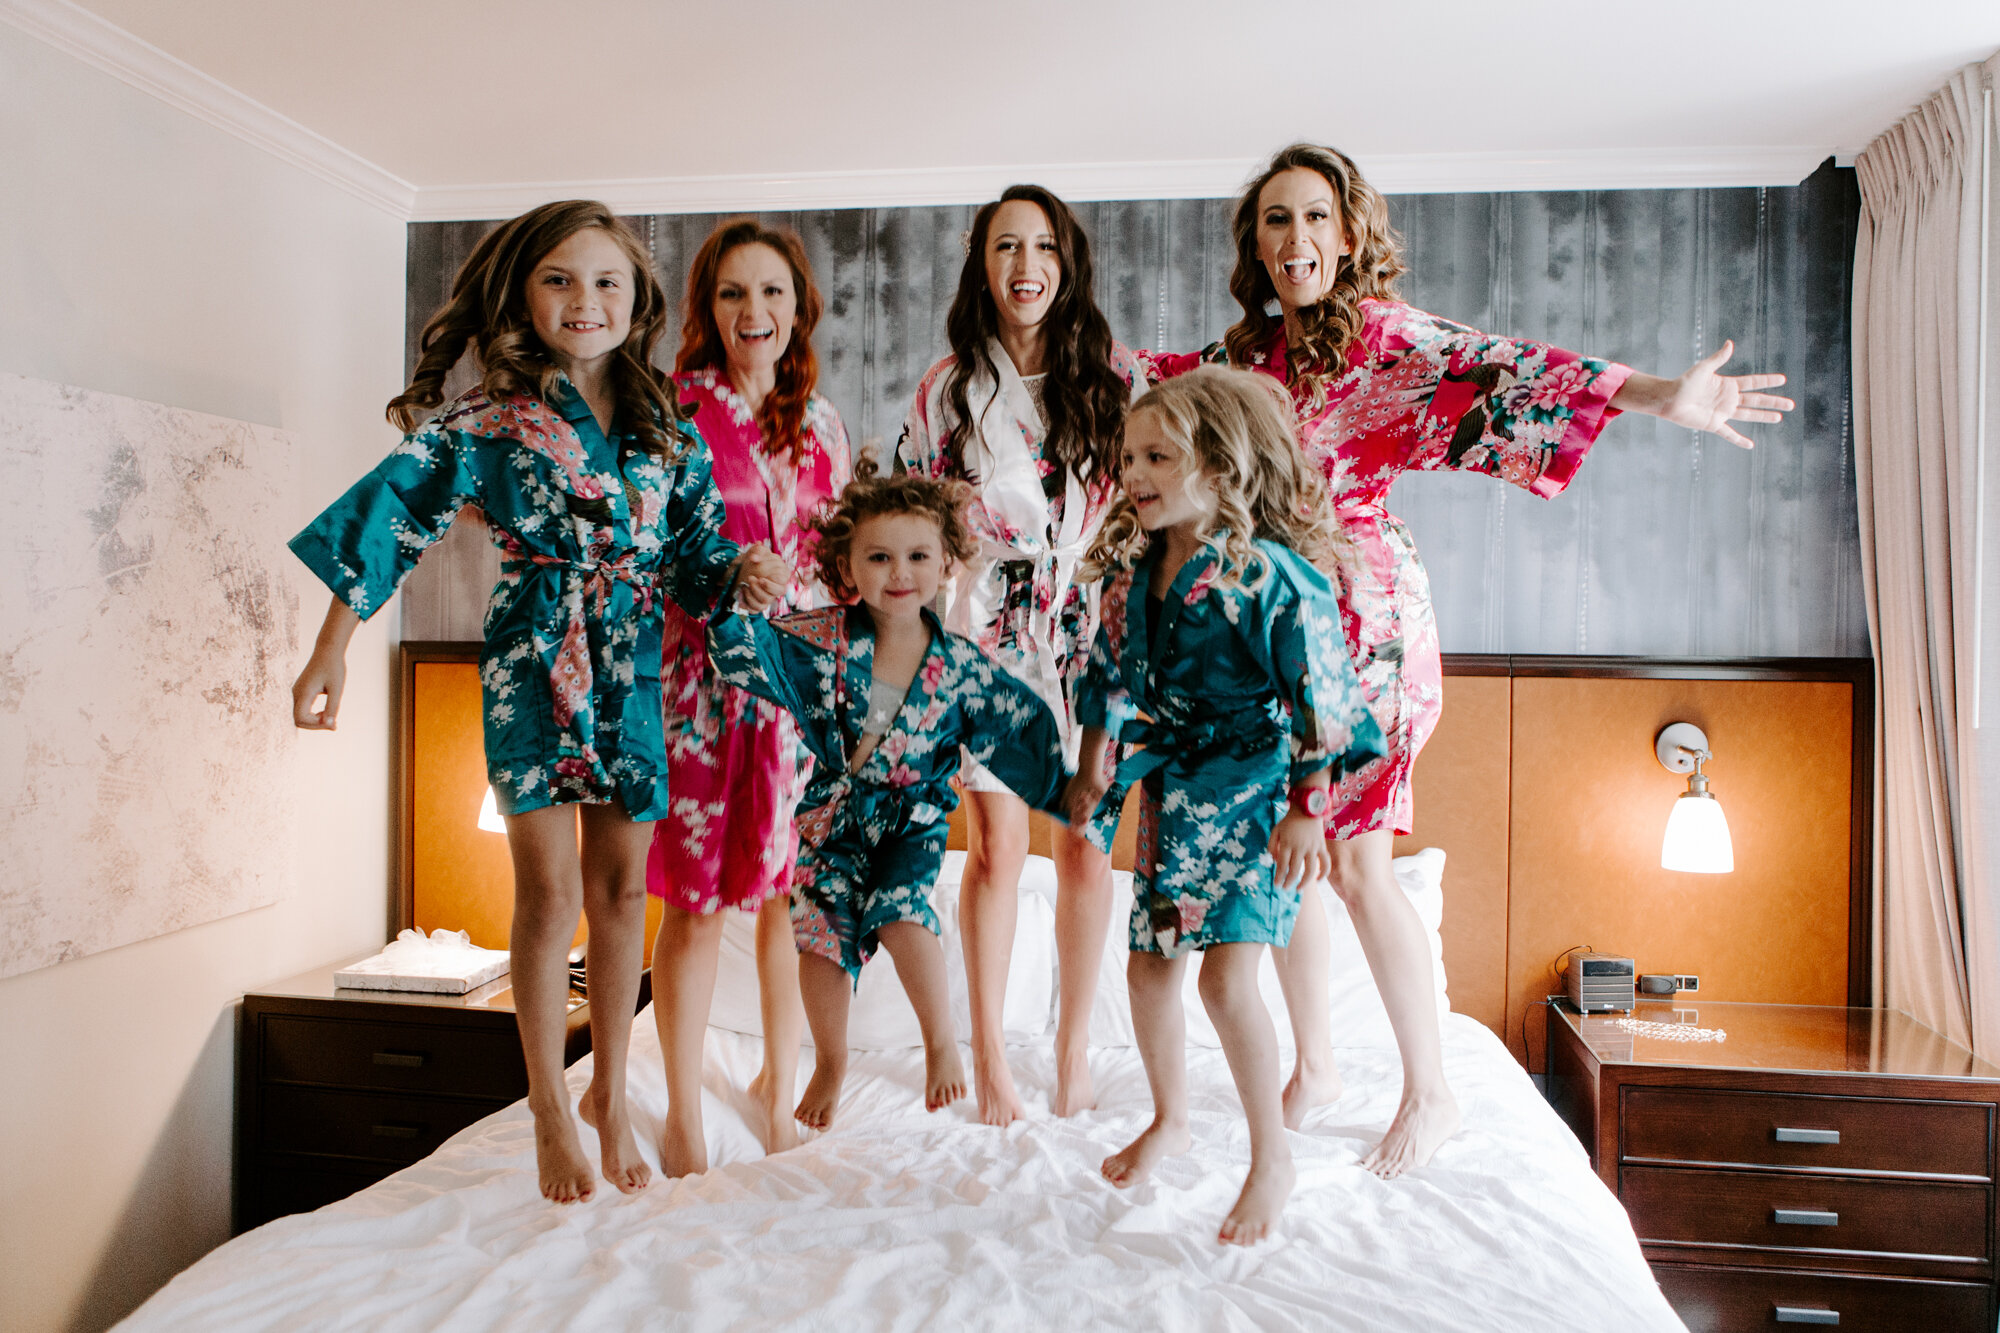 Bridal preparations. Portraits with bridesmaids and flower girls jumping in bed. Glamorous Wedding at Hotel Magnolia